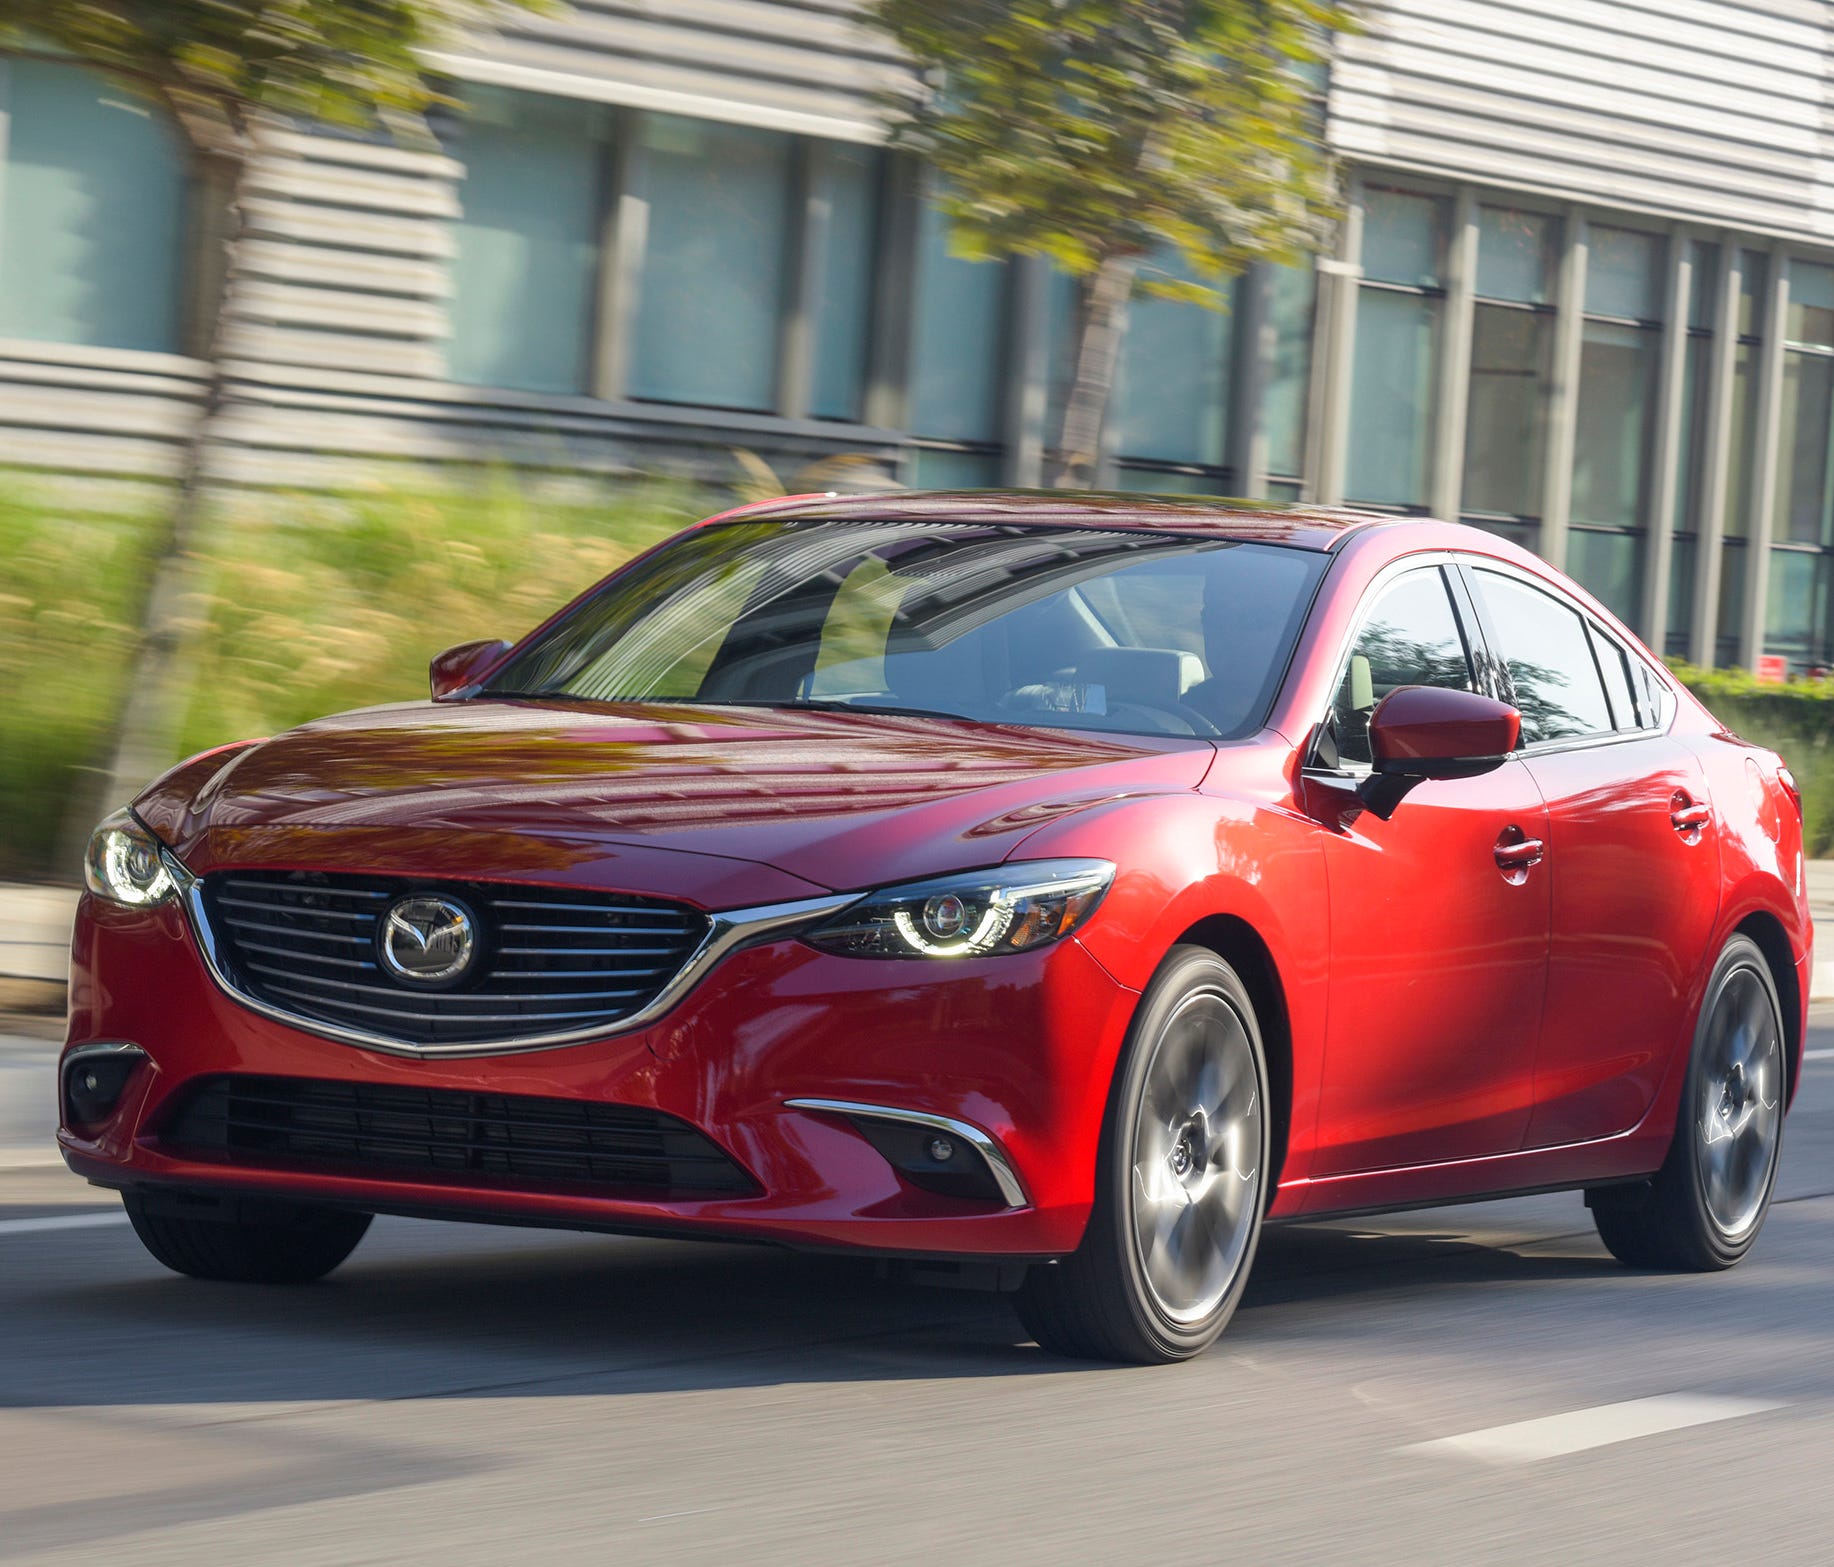 This photo provided by Mazda shows the Mazda 6, which has the right combination of looks, features and safety for a college student.